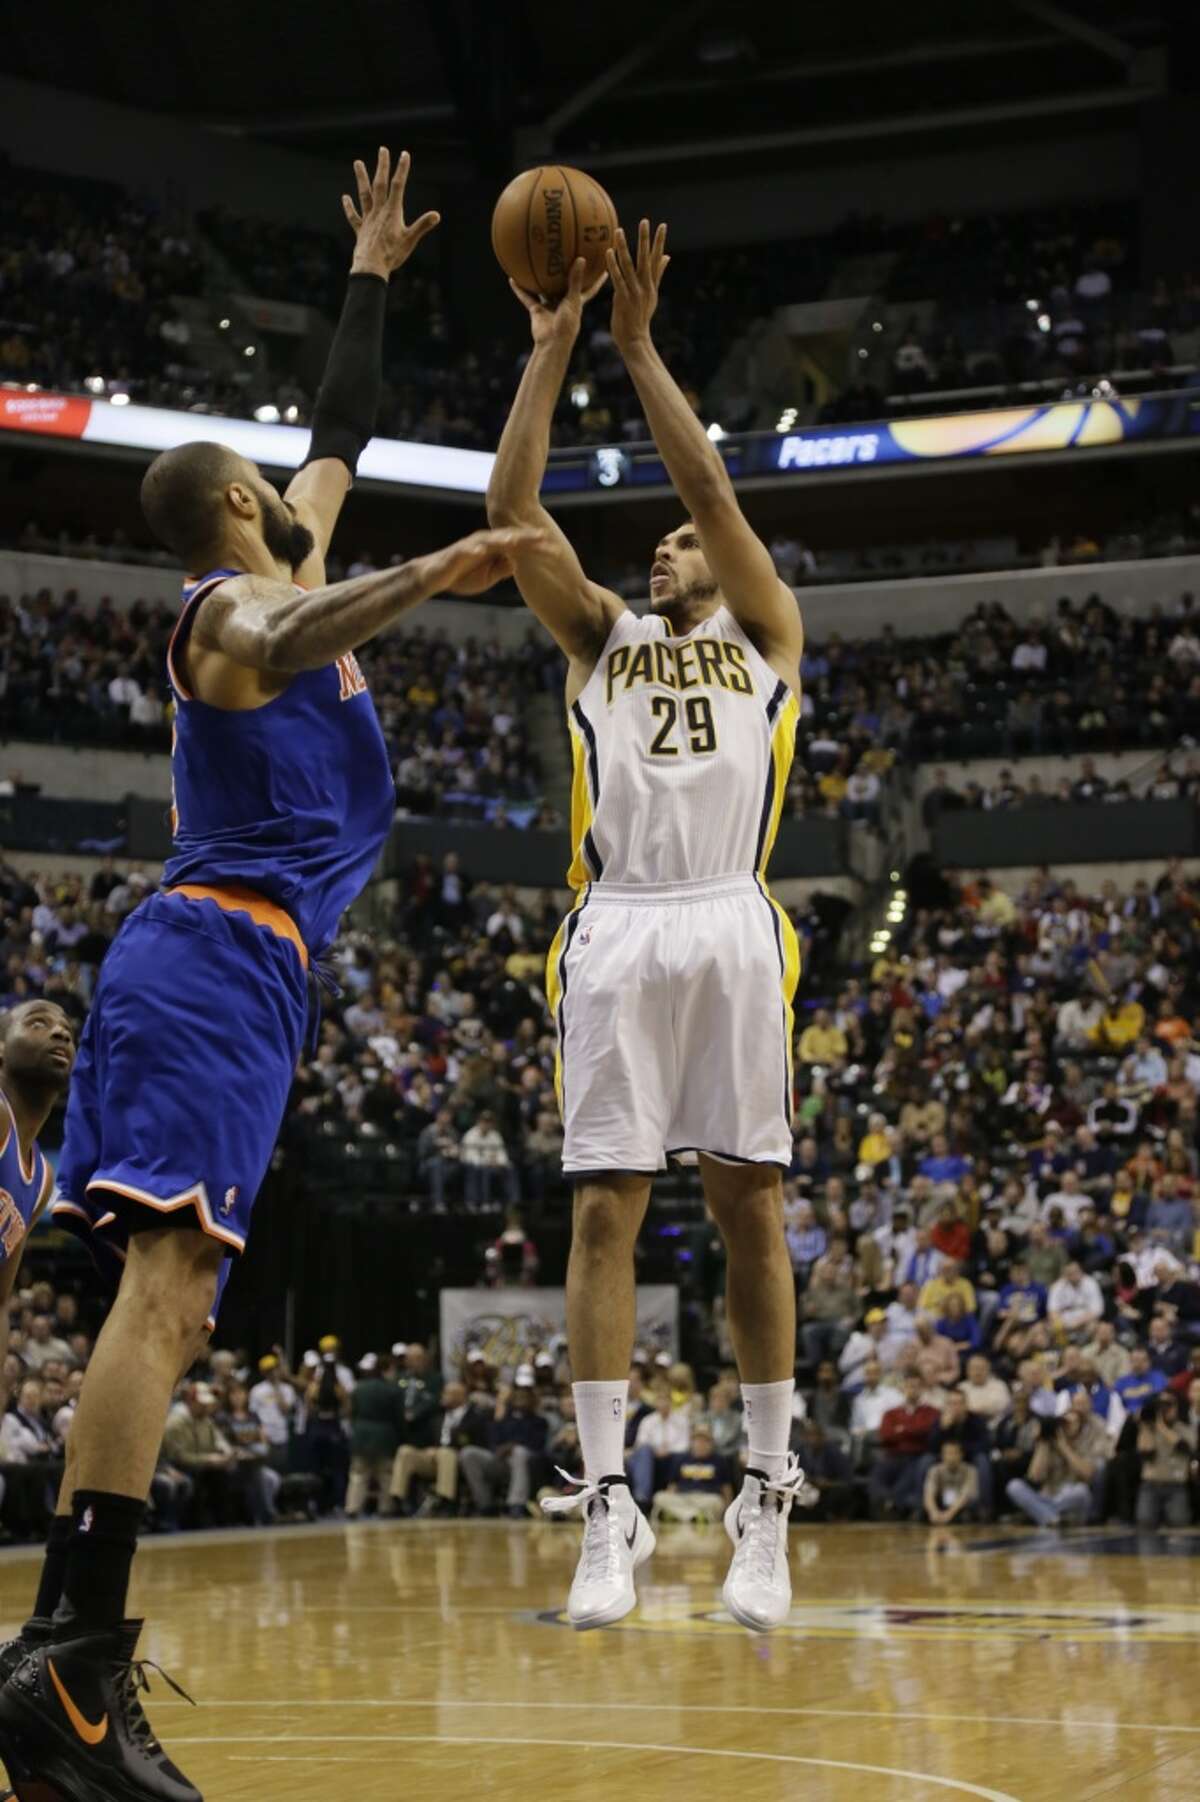 Indiana Pacers power forward Jeff Pendergraph (29) in action as the Indiana Pacers played the New York Knicks in an NBA basketball game in Indianapolis, Wednesday, Feb. 20, 2013. The Pacers won 125-91. (AJ Mast / Associated Press)